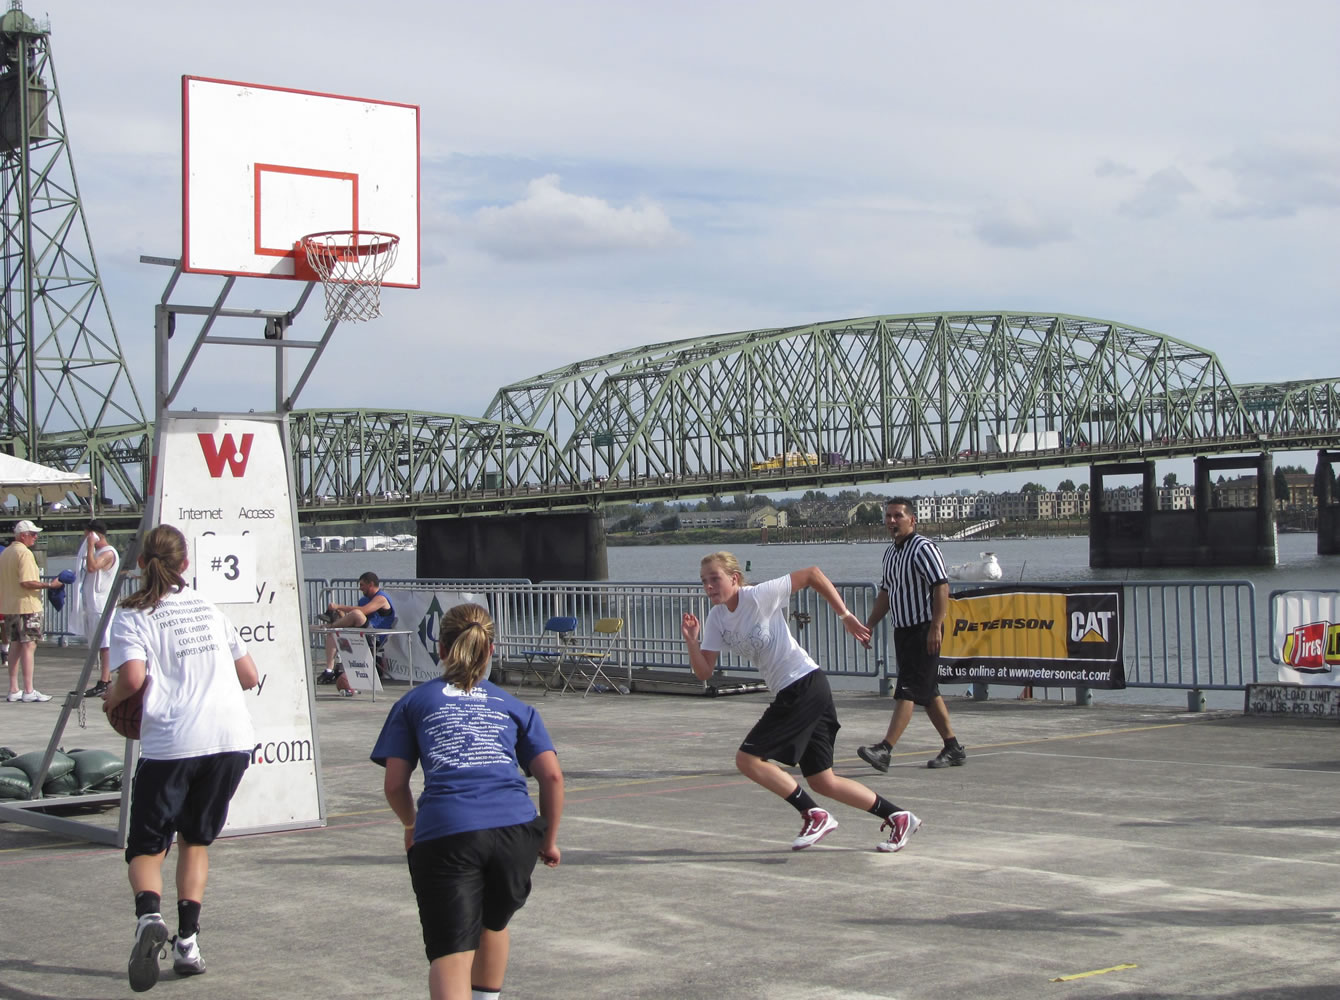 Hoops on the River brings basketball fans together to compete, learn or just cheer on athletes.